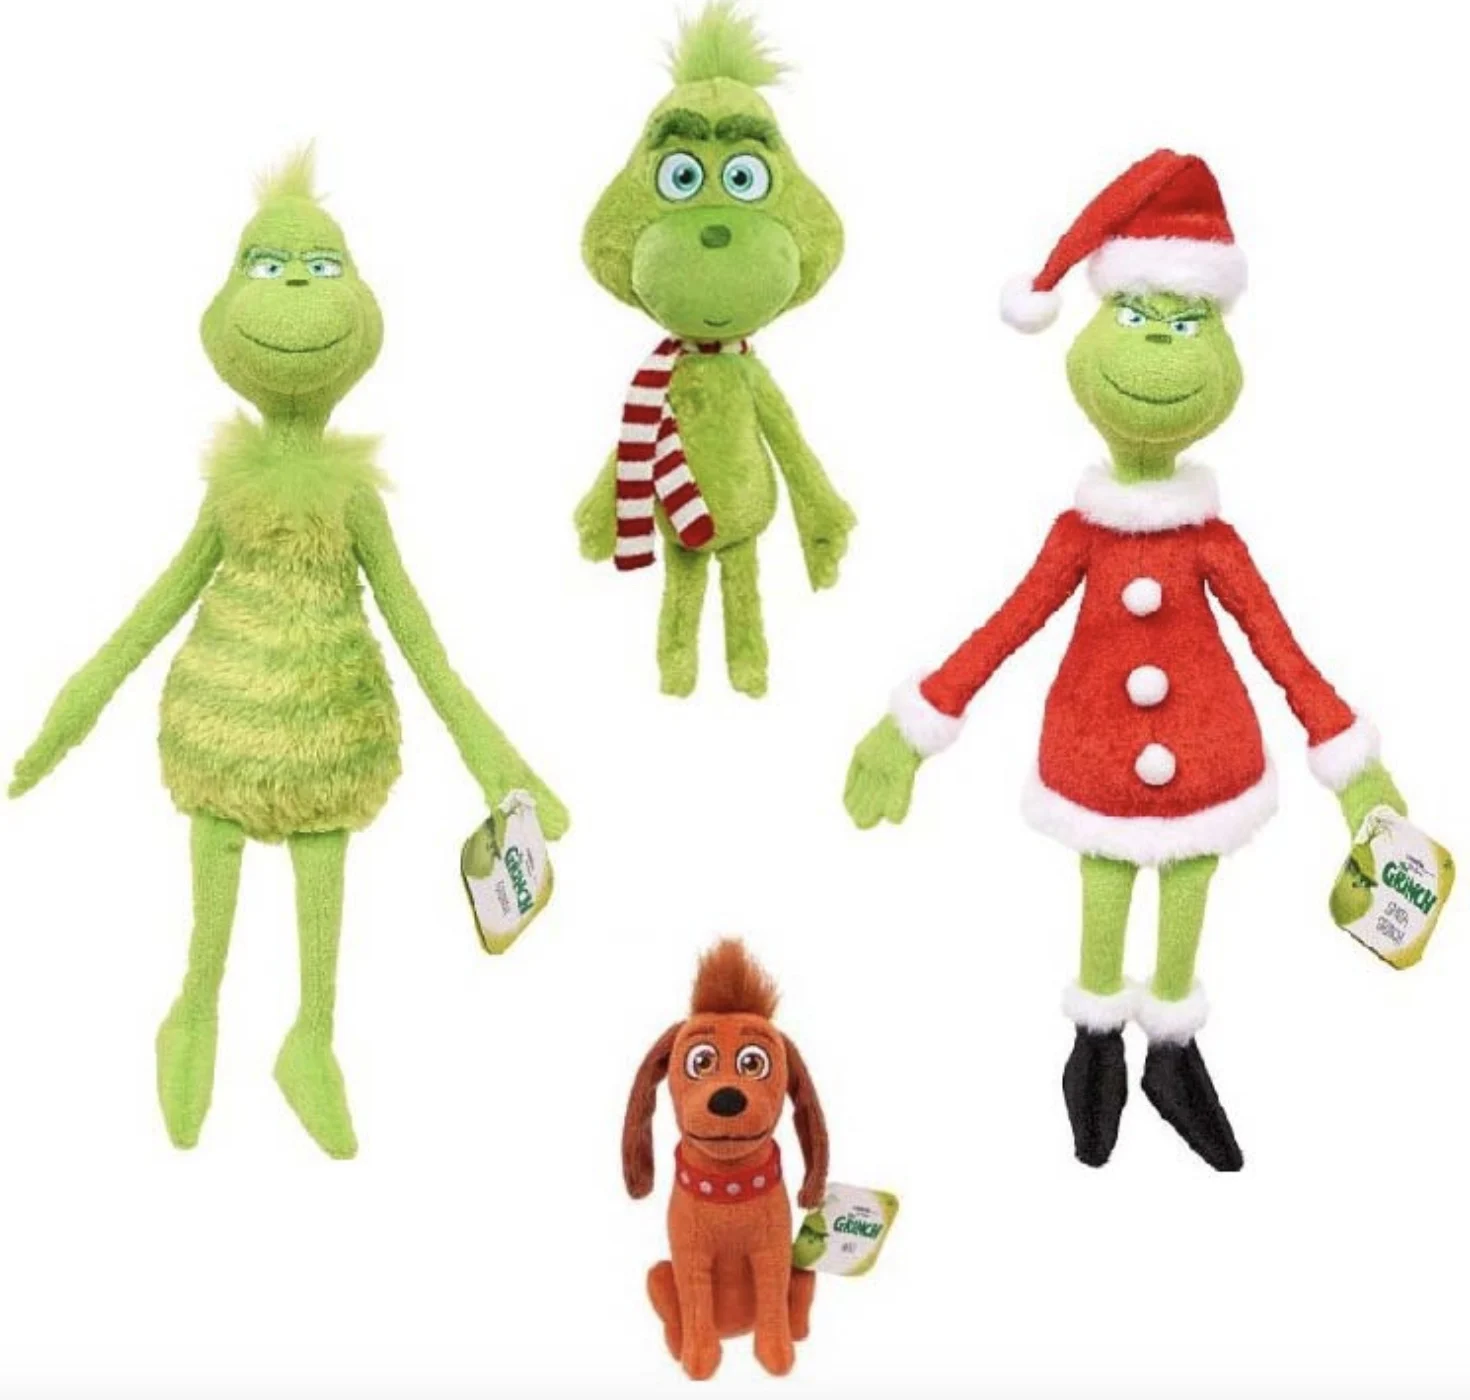 25-32cm How Grinchs Stole Plush Toys Cartoon Grinch Max Dog Toy Soft Stuffed Doll For Children Christmas Gifts